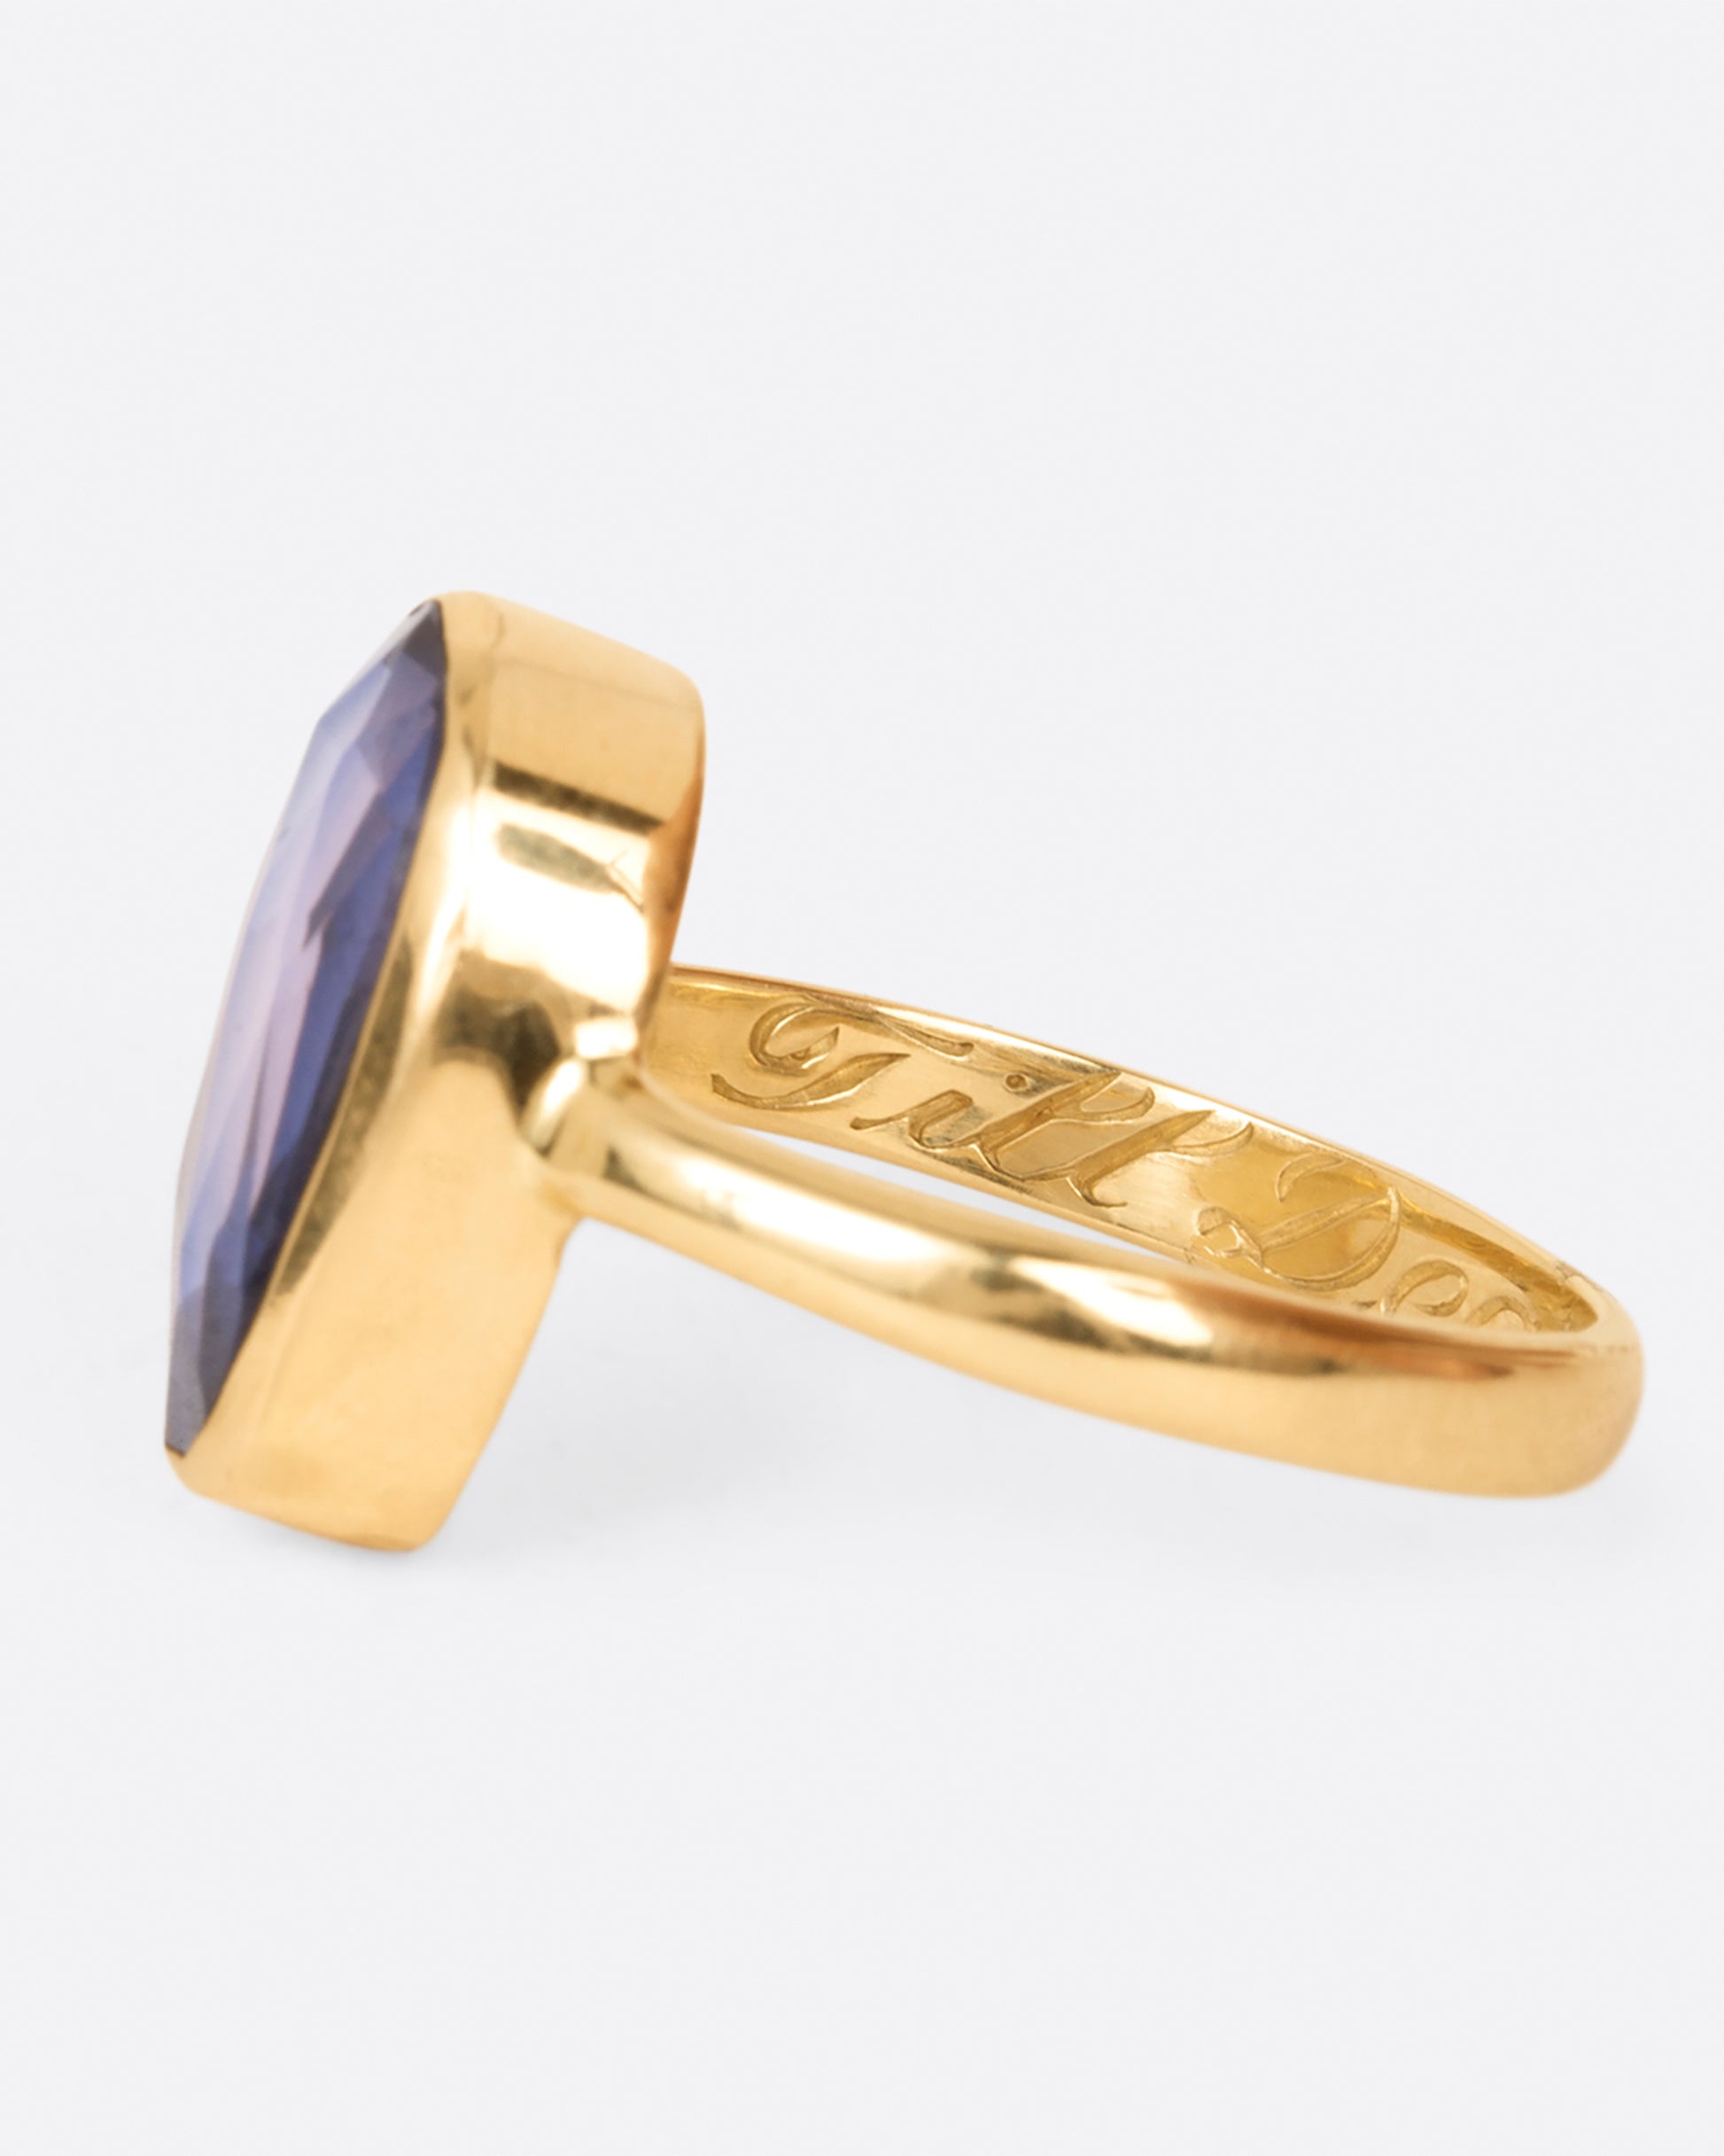 A ring featuring an oval rose cut blue sapphire with a carved skull behind it, shown from the side.